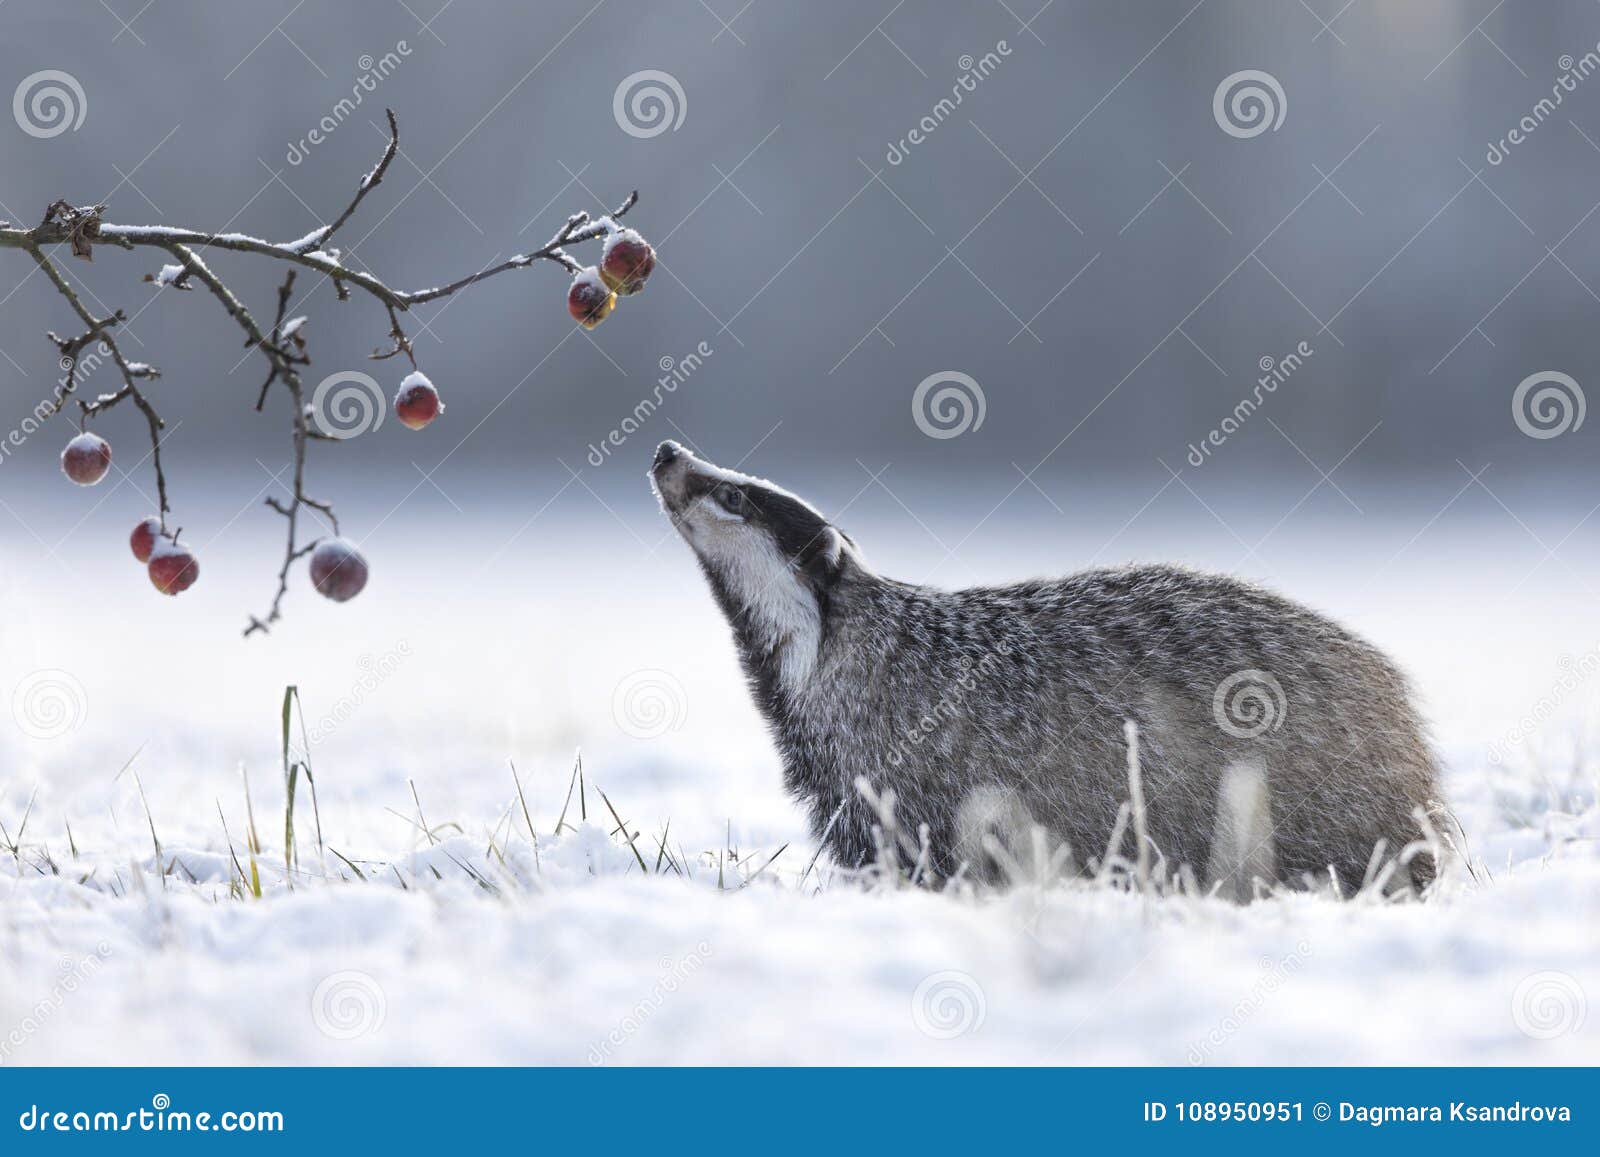 badger in winter with apples